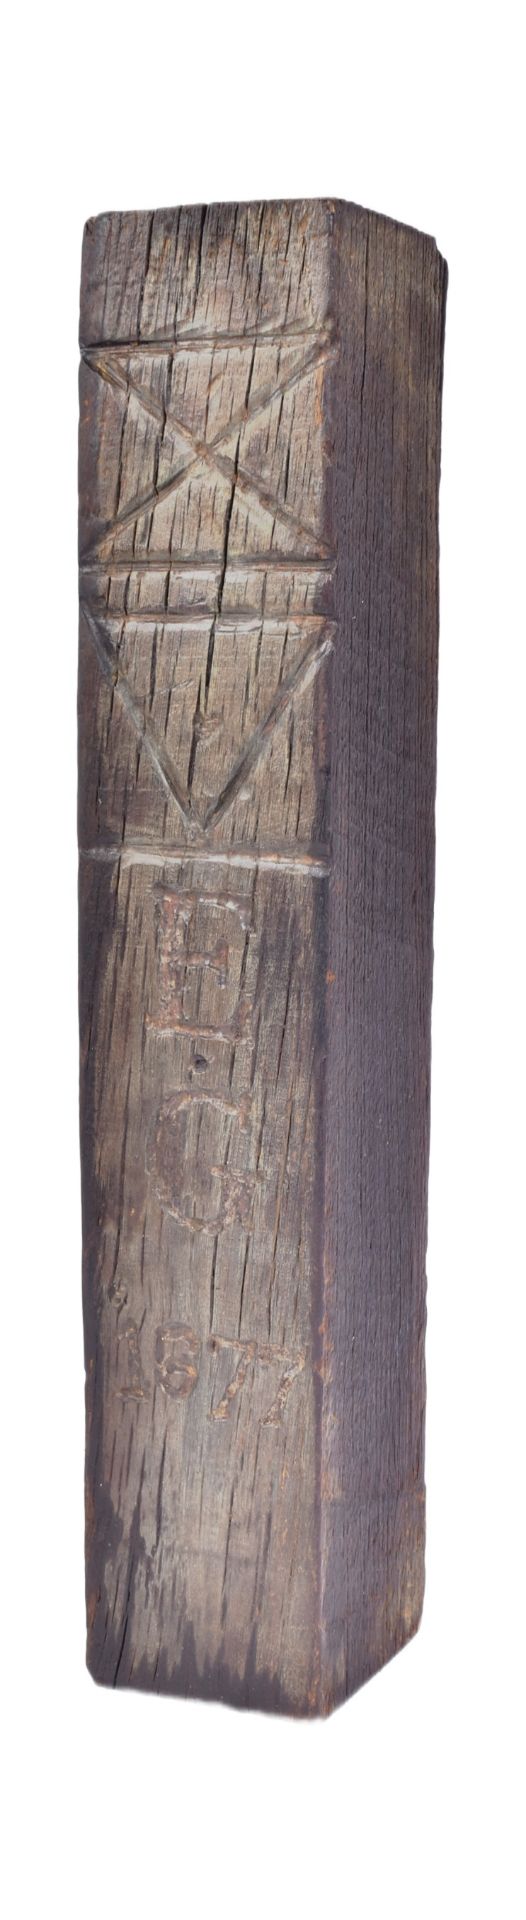 WITCH POST - 1677 DATED WITCHES POST W/CROSS OF ST ANDREW